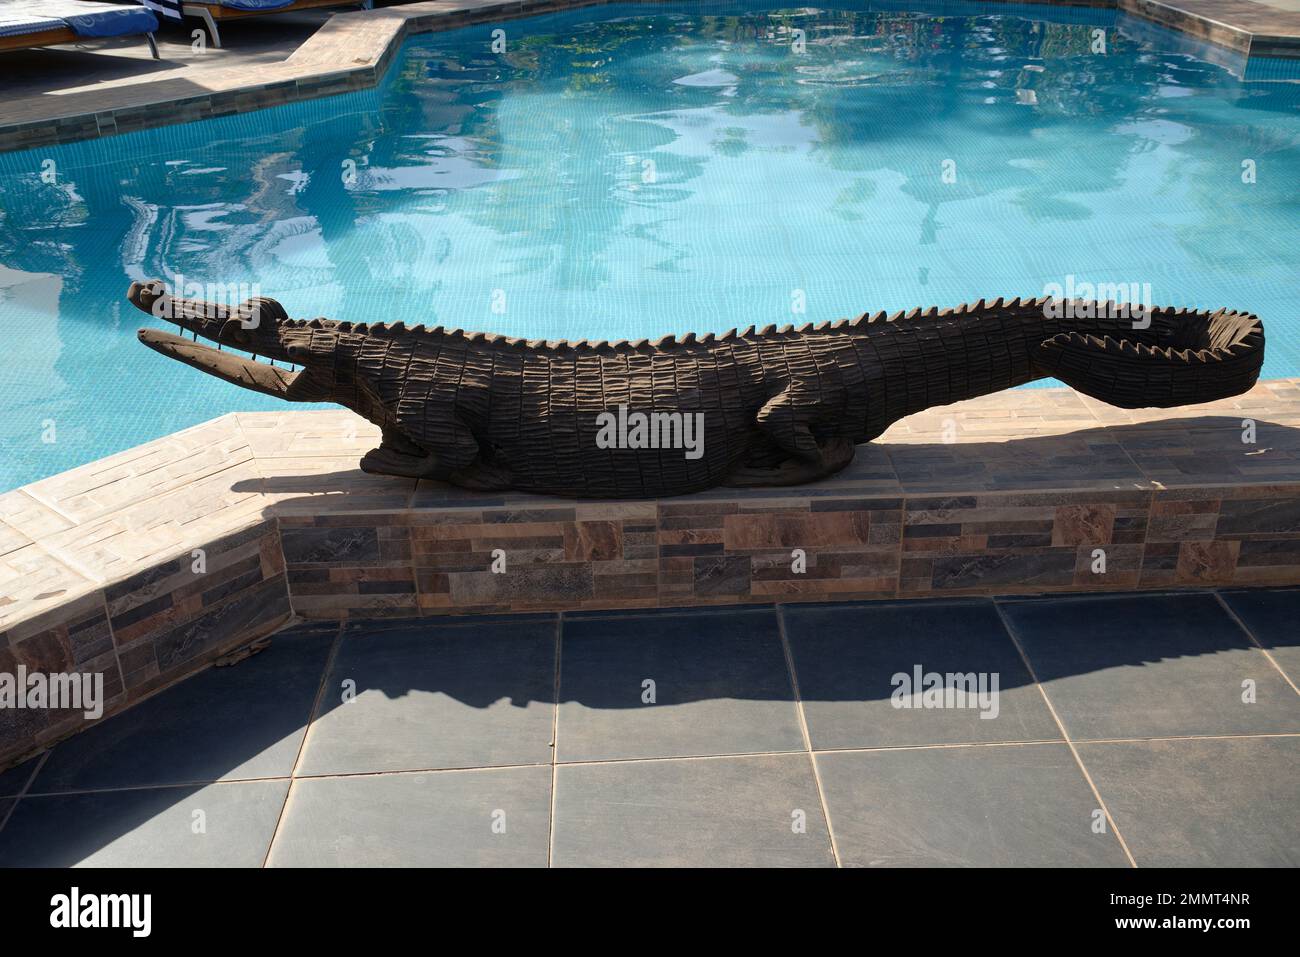 A wooden sculpture of a crocodile next to a swimming pool in the Gambia, West Africa. Stock Photo